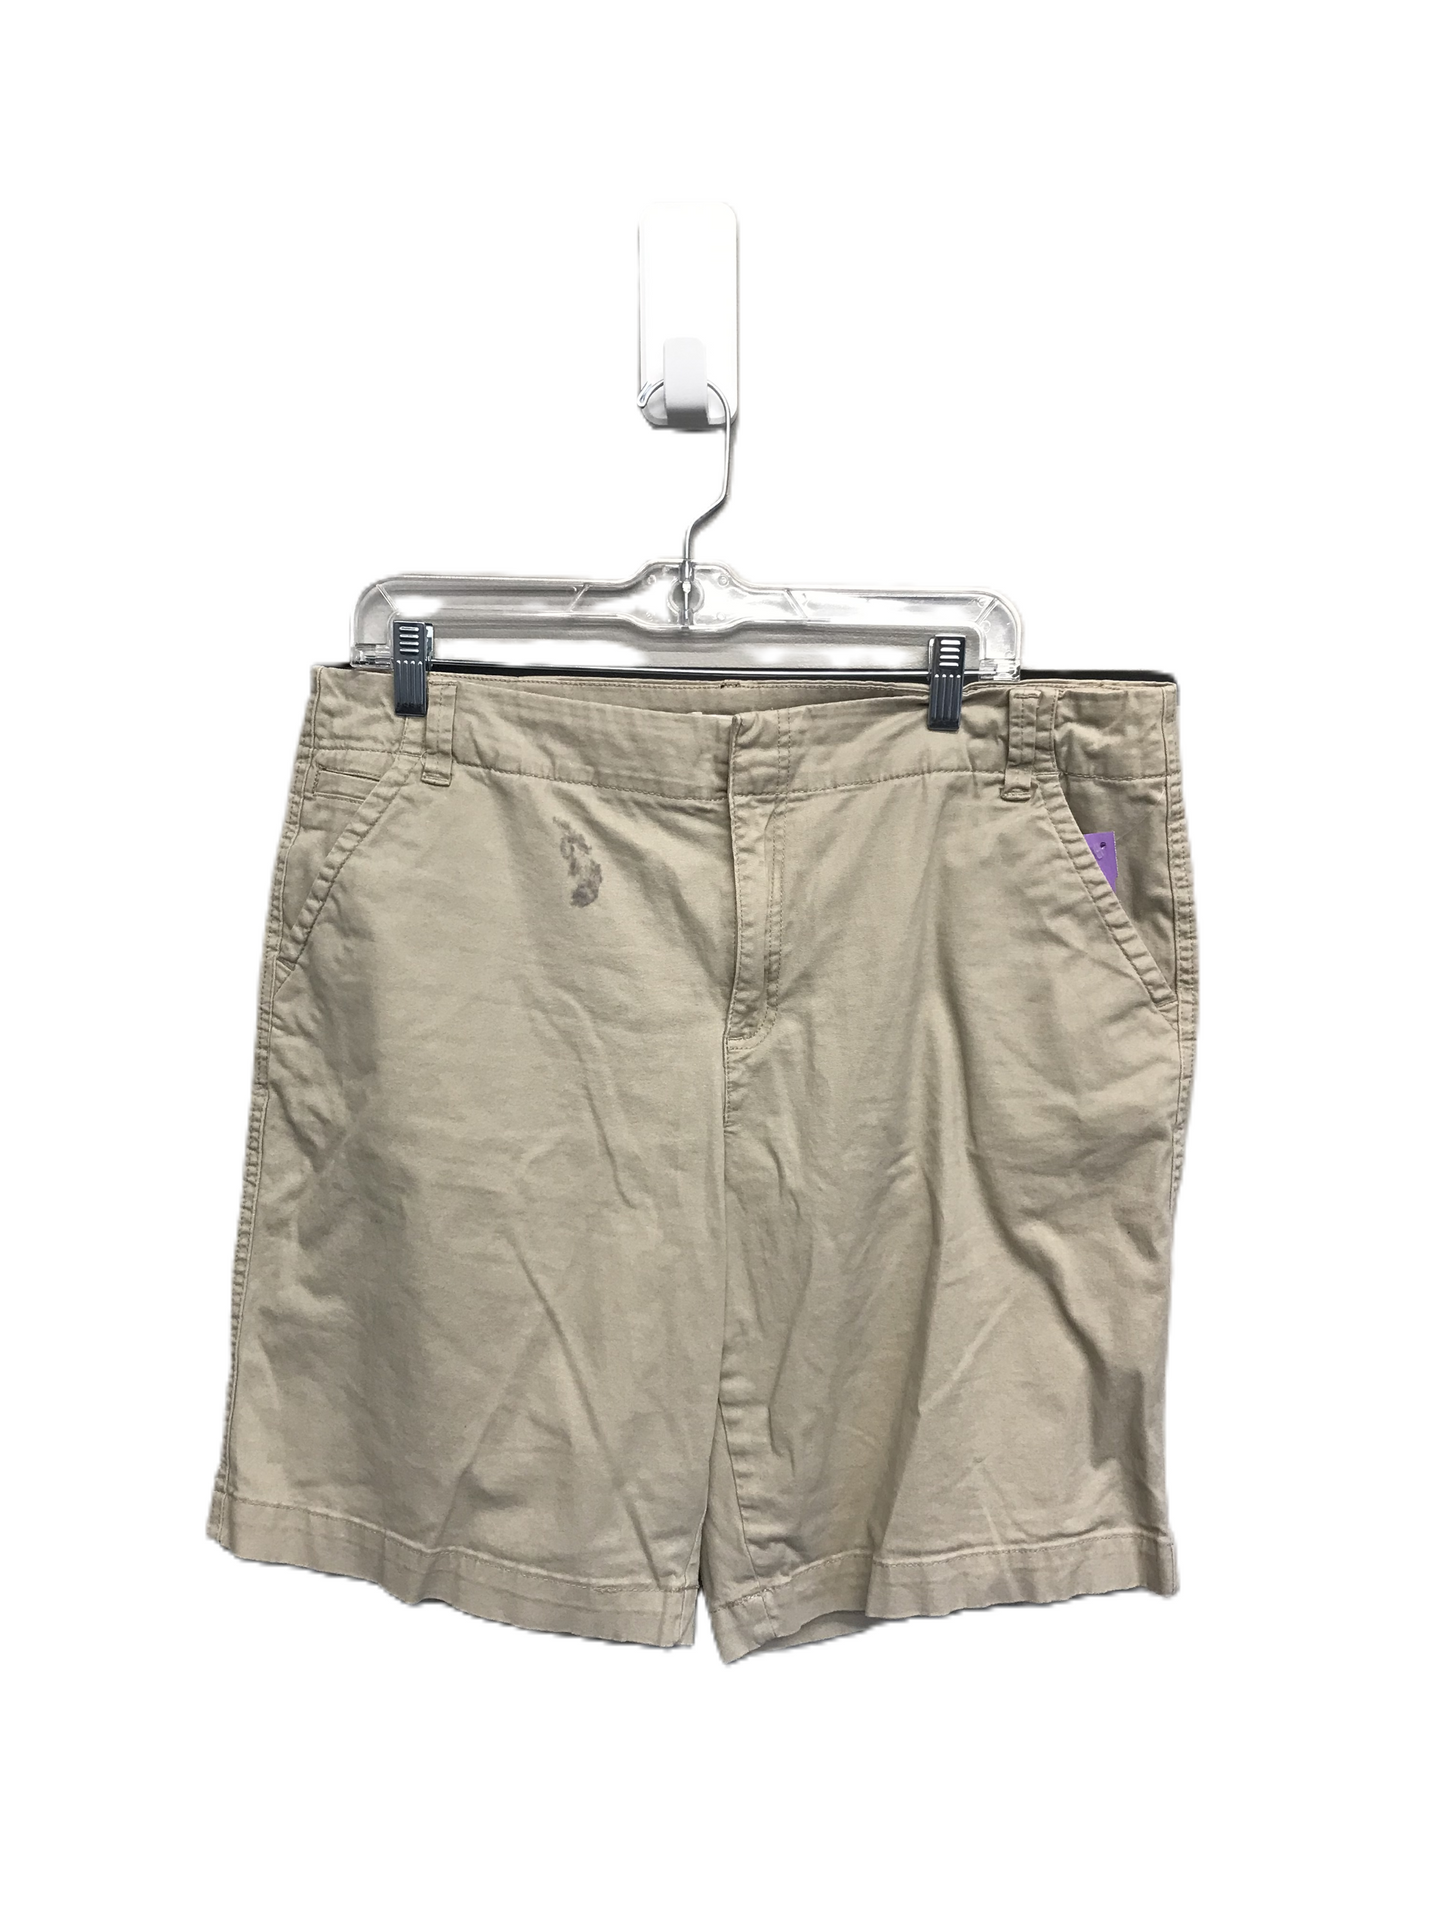 Tan Shorts By Charter Club, Size: 14